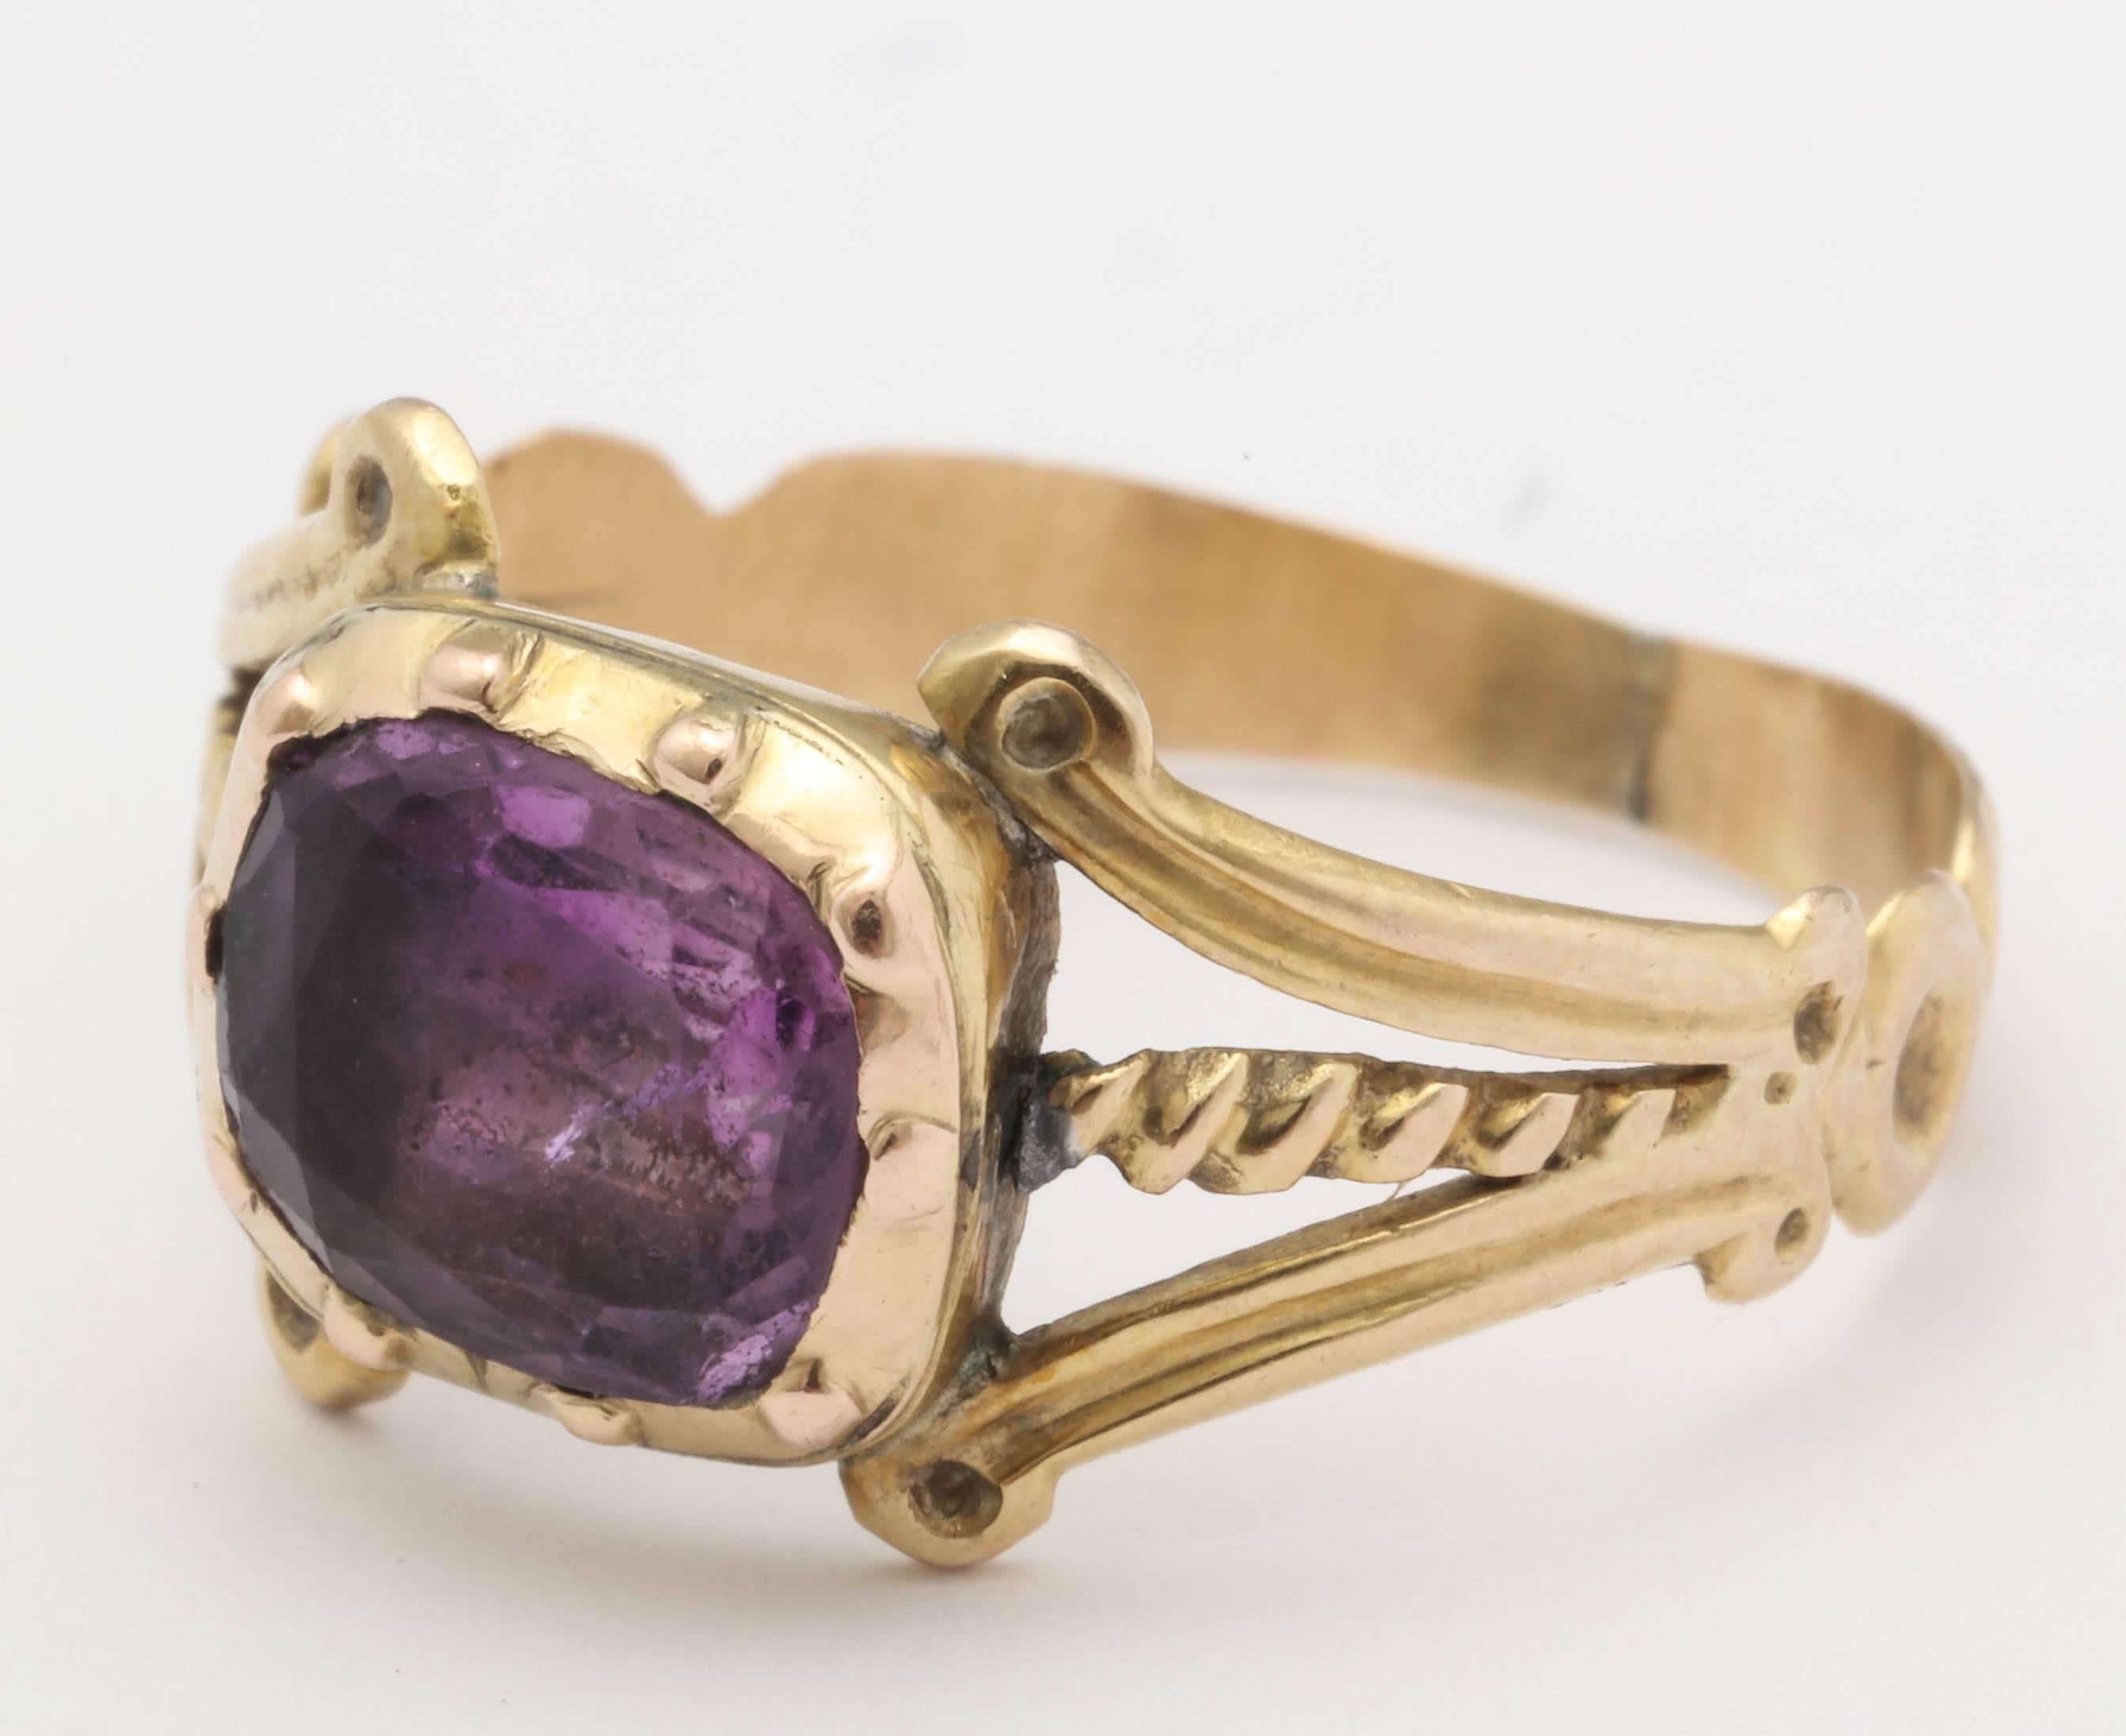 Lovely deep purple amethyst in a closed back setting was repurposed in the Victorian era and made into a ring with this open work, engraved shank. Likely starting life as a button, many pieces were repurposed throughout the years as occurs today. A